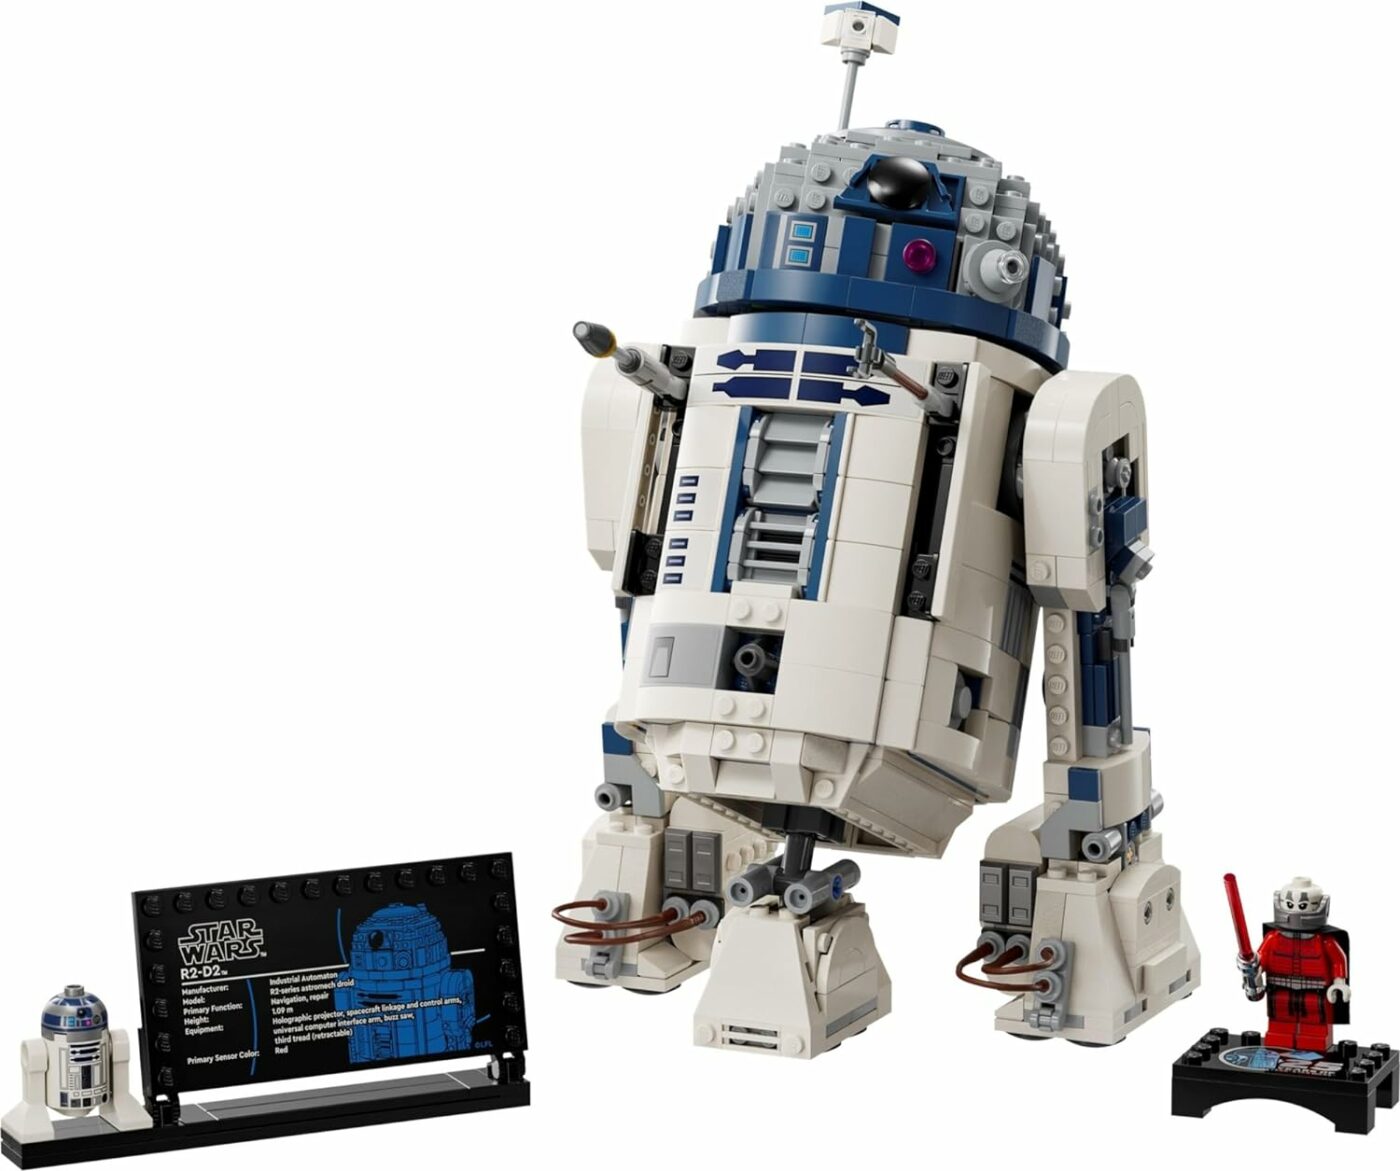 Entire lineup of LEGO Star Wars 25th anniversary set includes midi-scale Millennium Falcon, Tantive IV and the Invisible Hand!32